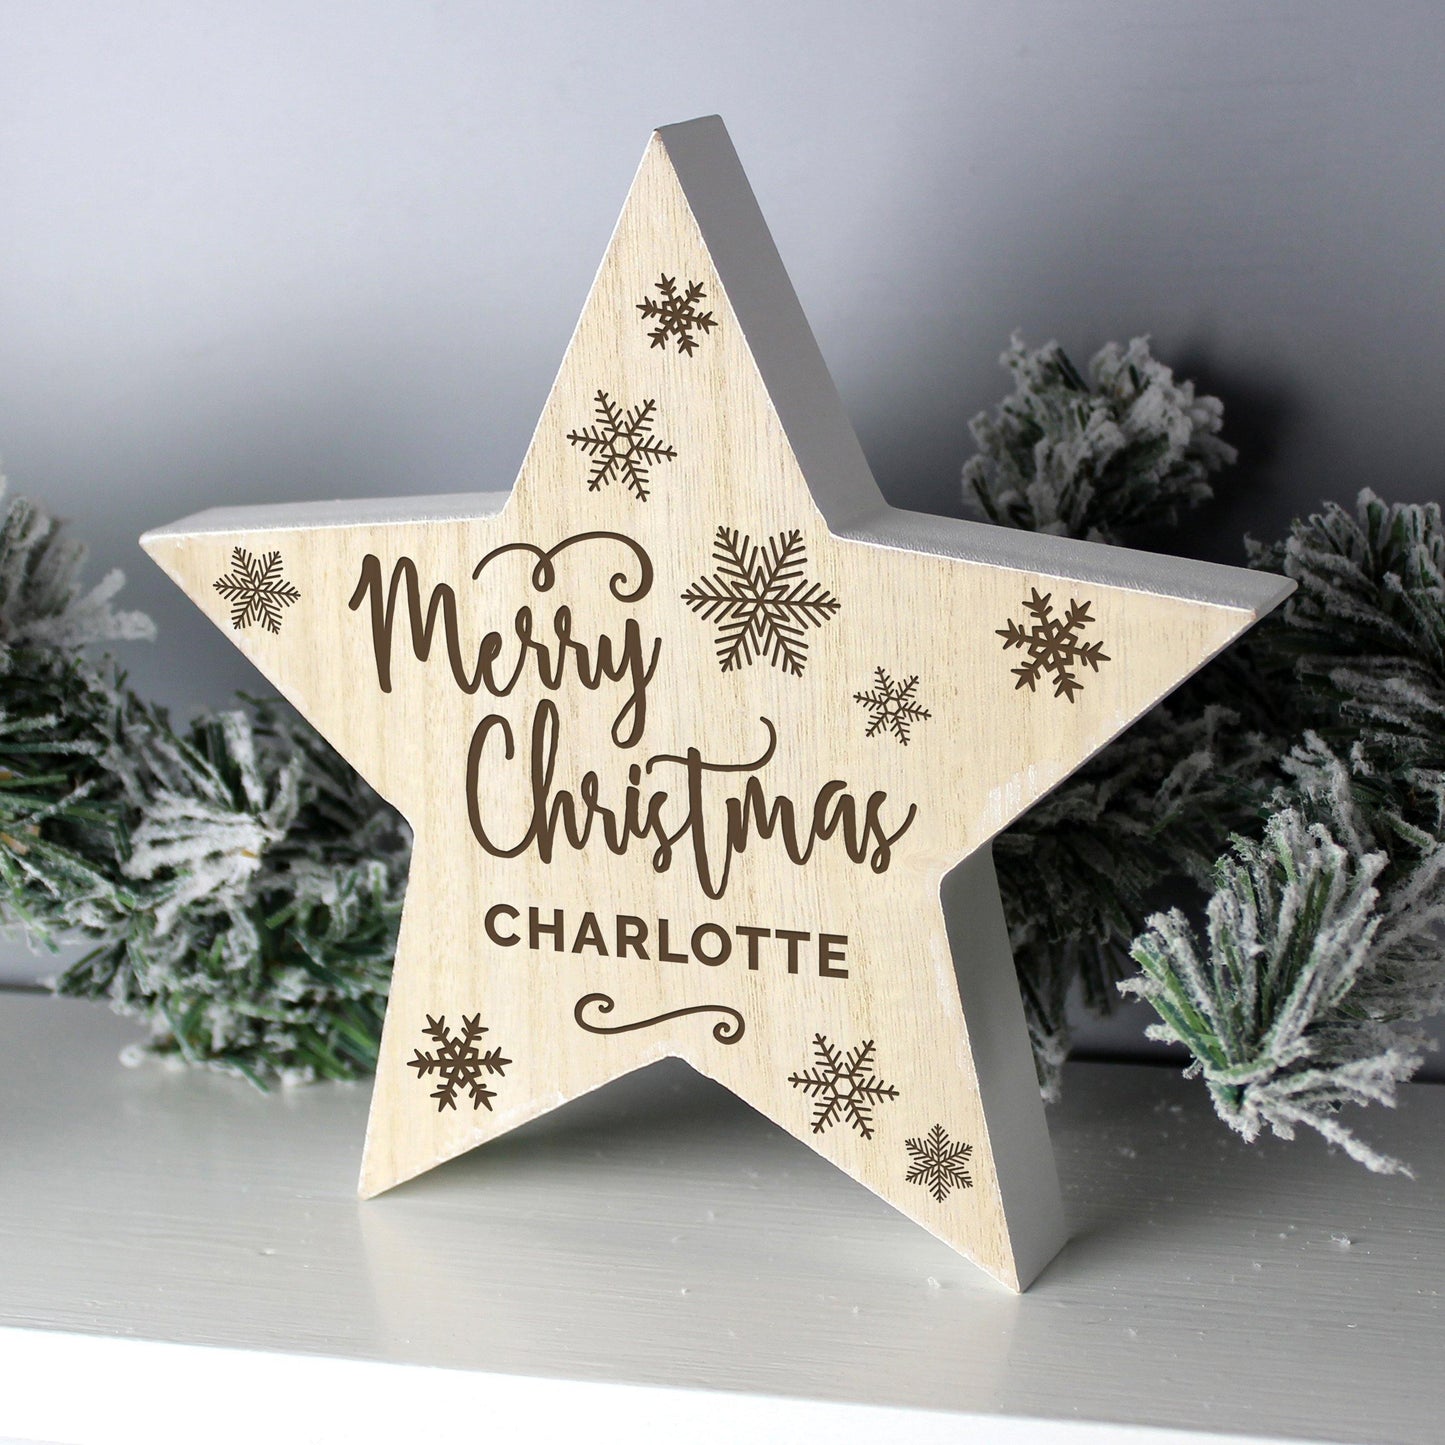 Personalised Merry Christmas Rustic Wooden Star Decoration - Kporium Home & Garden